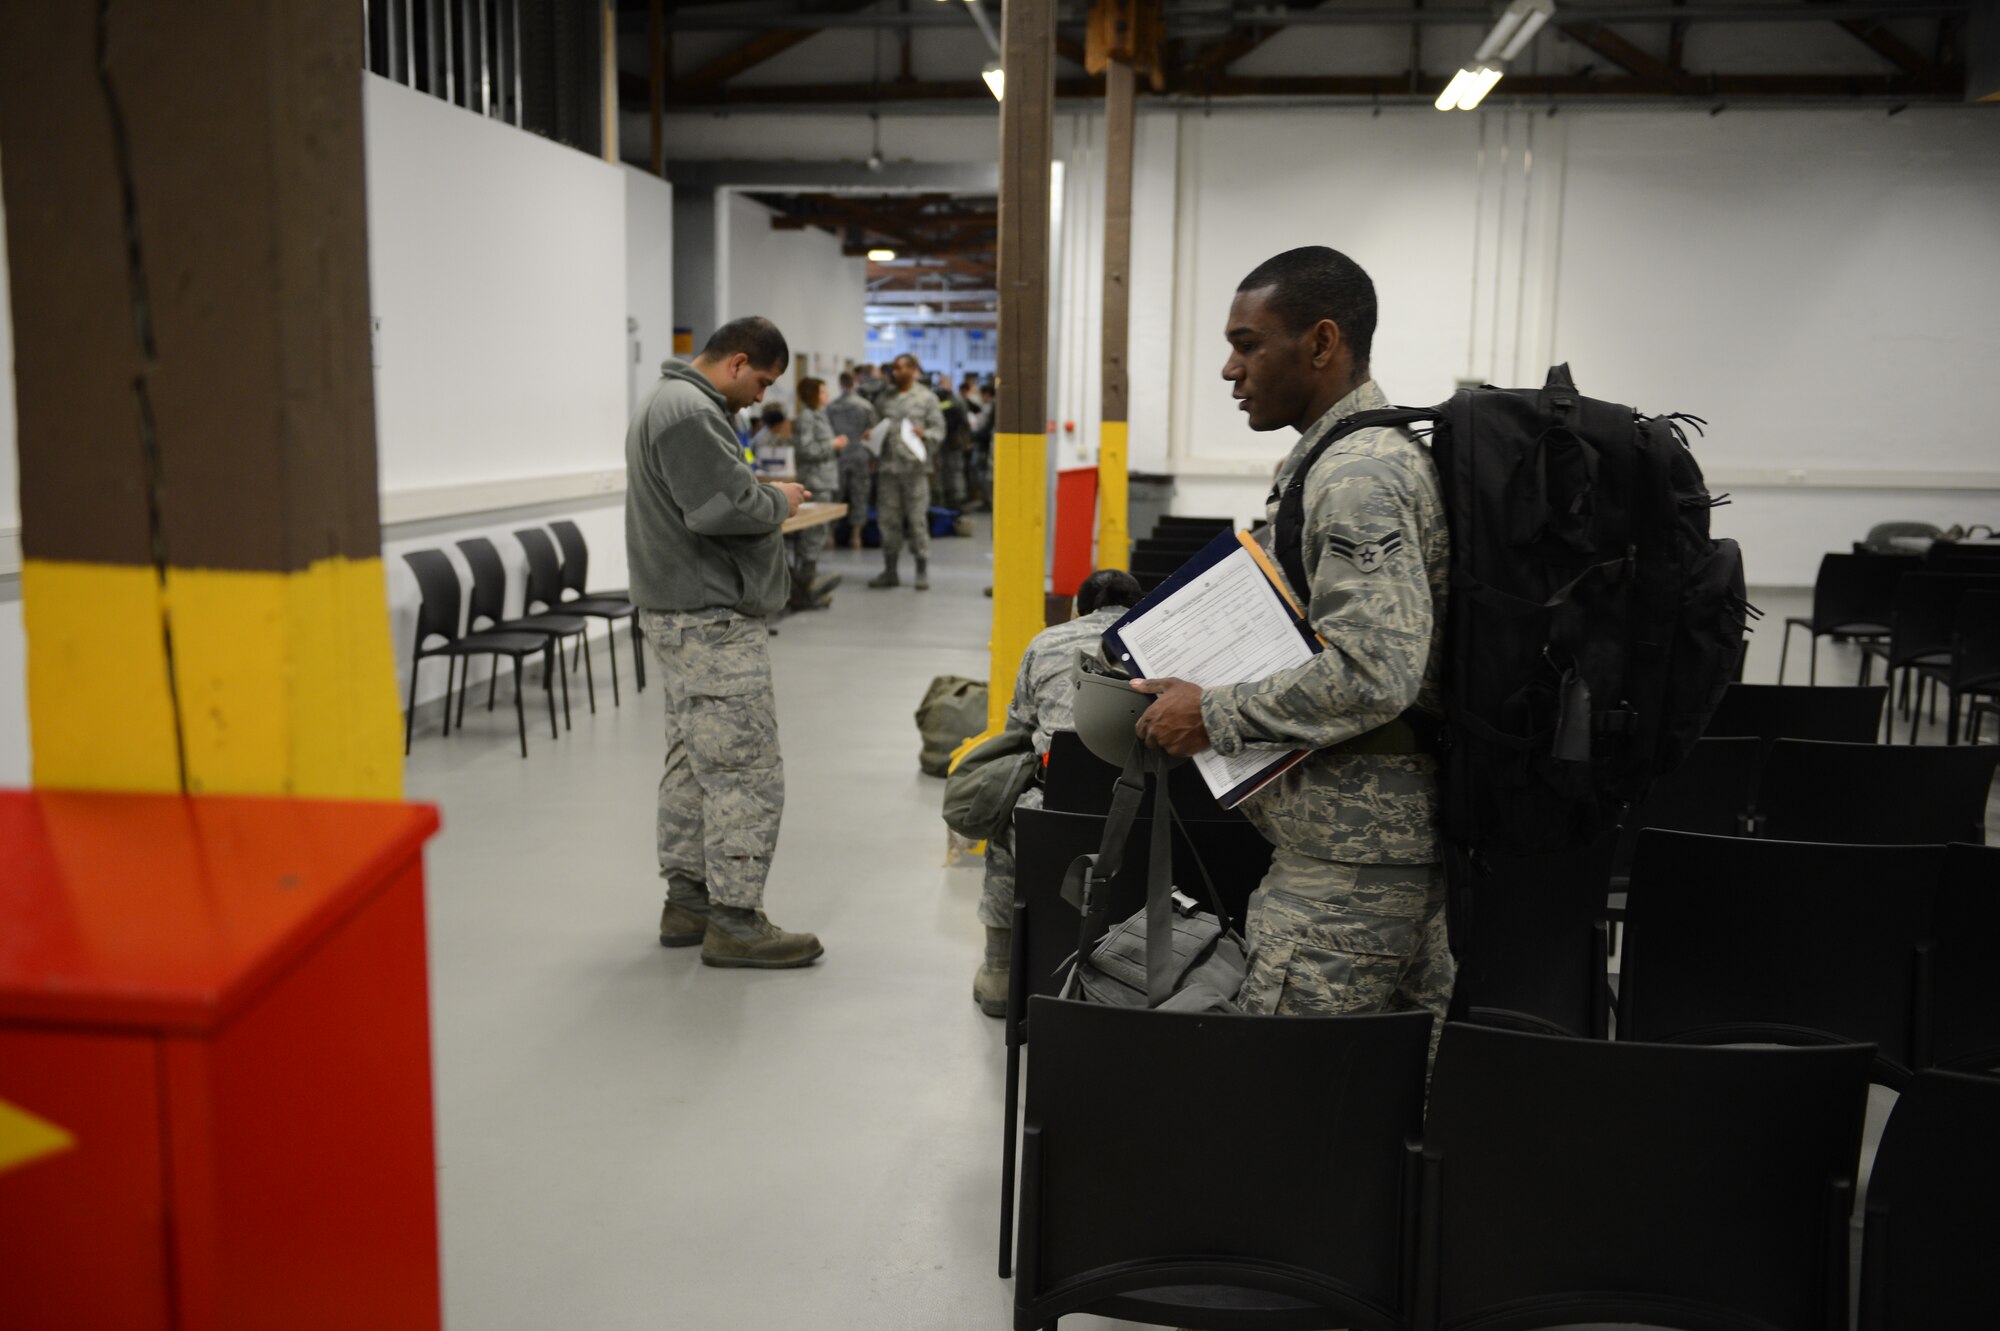 SPANGDAHLEM AIR BASE, Germany – U.S. Air Force Airman 1st Class Daniel Taylor carries his belongings before processing the Personnel Deployment Function line here April 4, 2013. This is Taylor’s first deployment since he joined the Air Force. (U.S. Air Force photo by Staff Sgt. Nathanael Callon/Released)